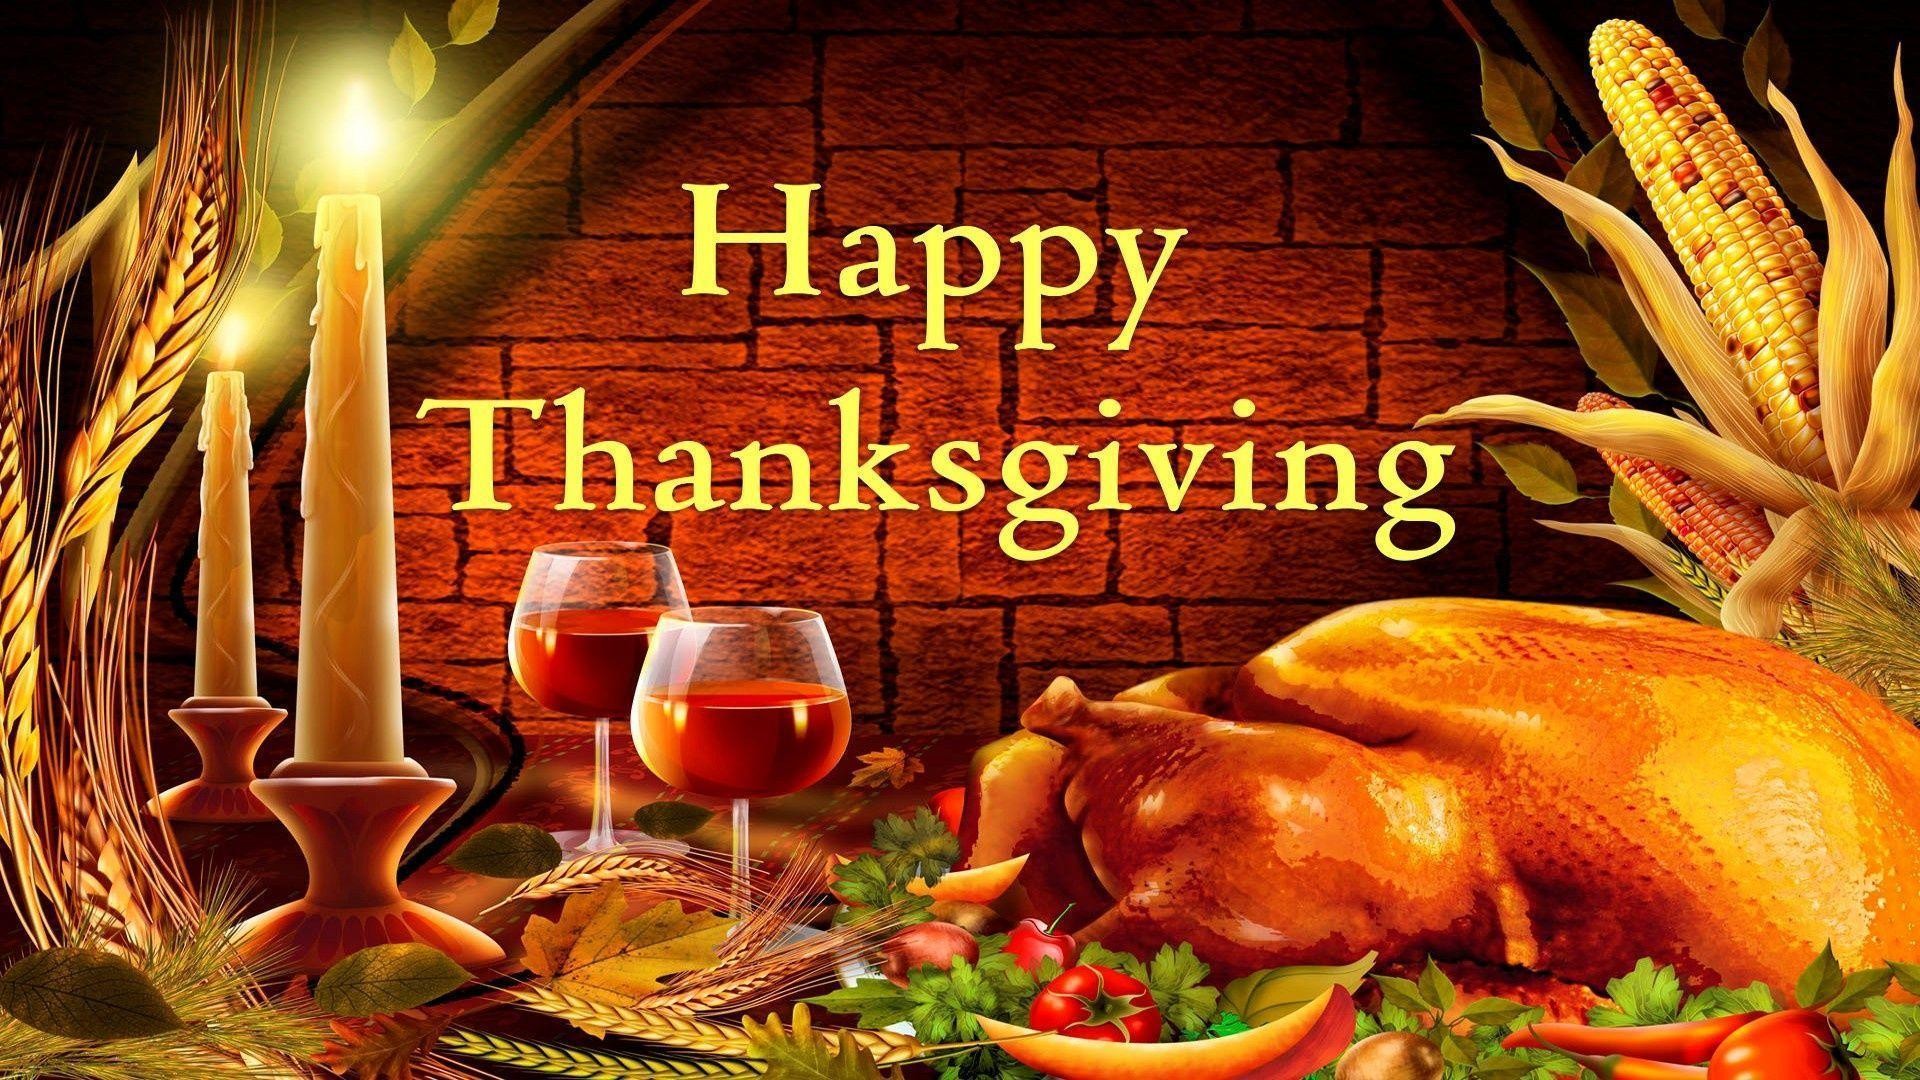 Happy Thanksgiving Image Pictures Photos